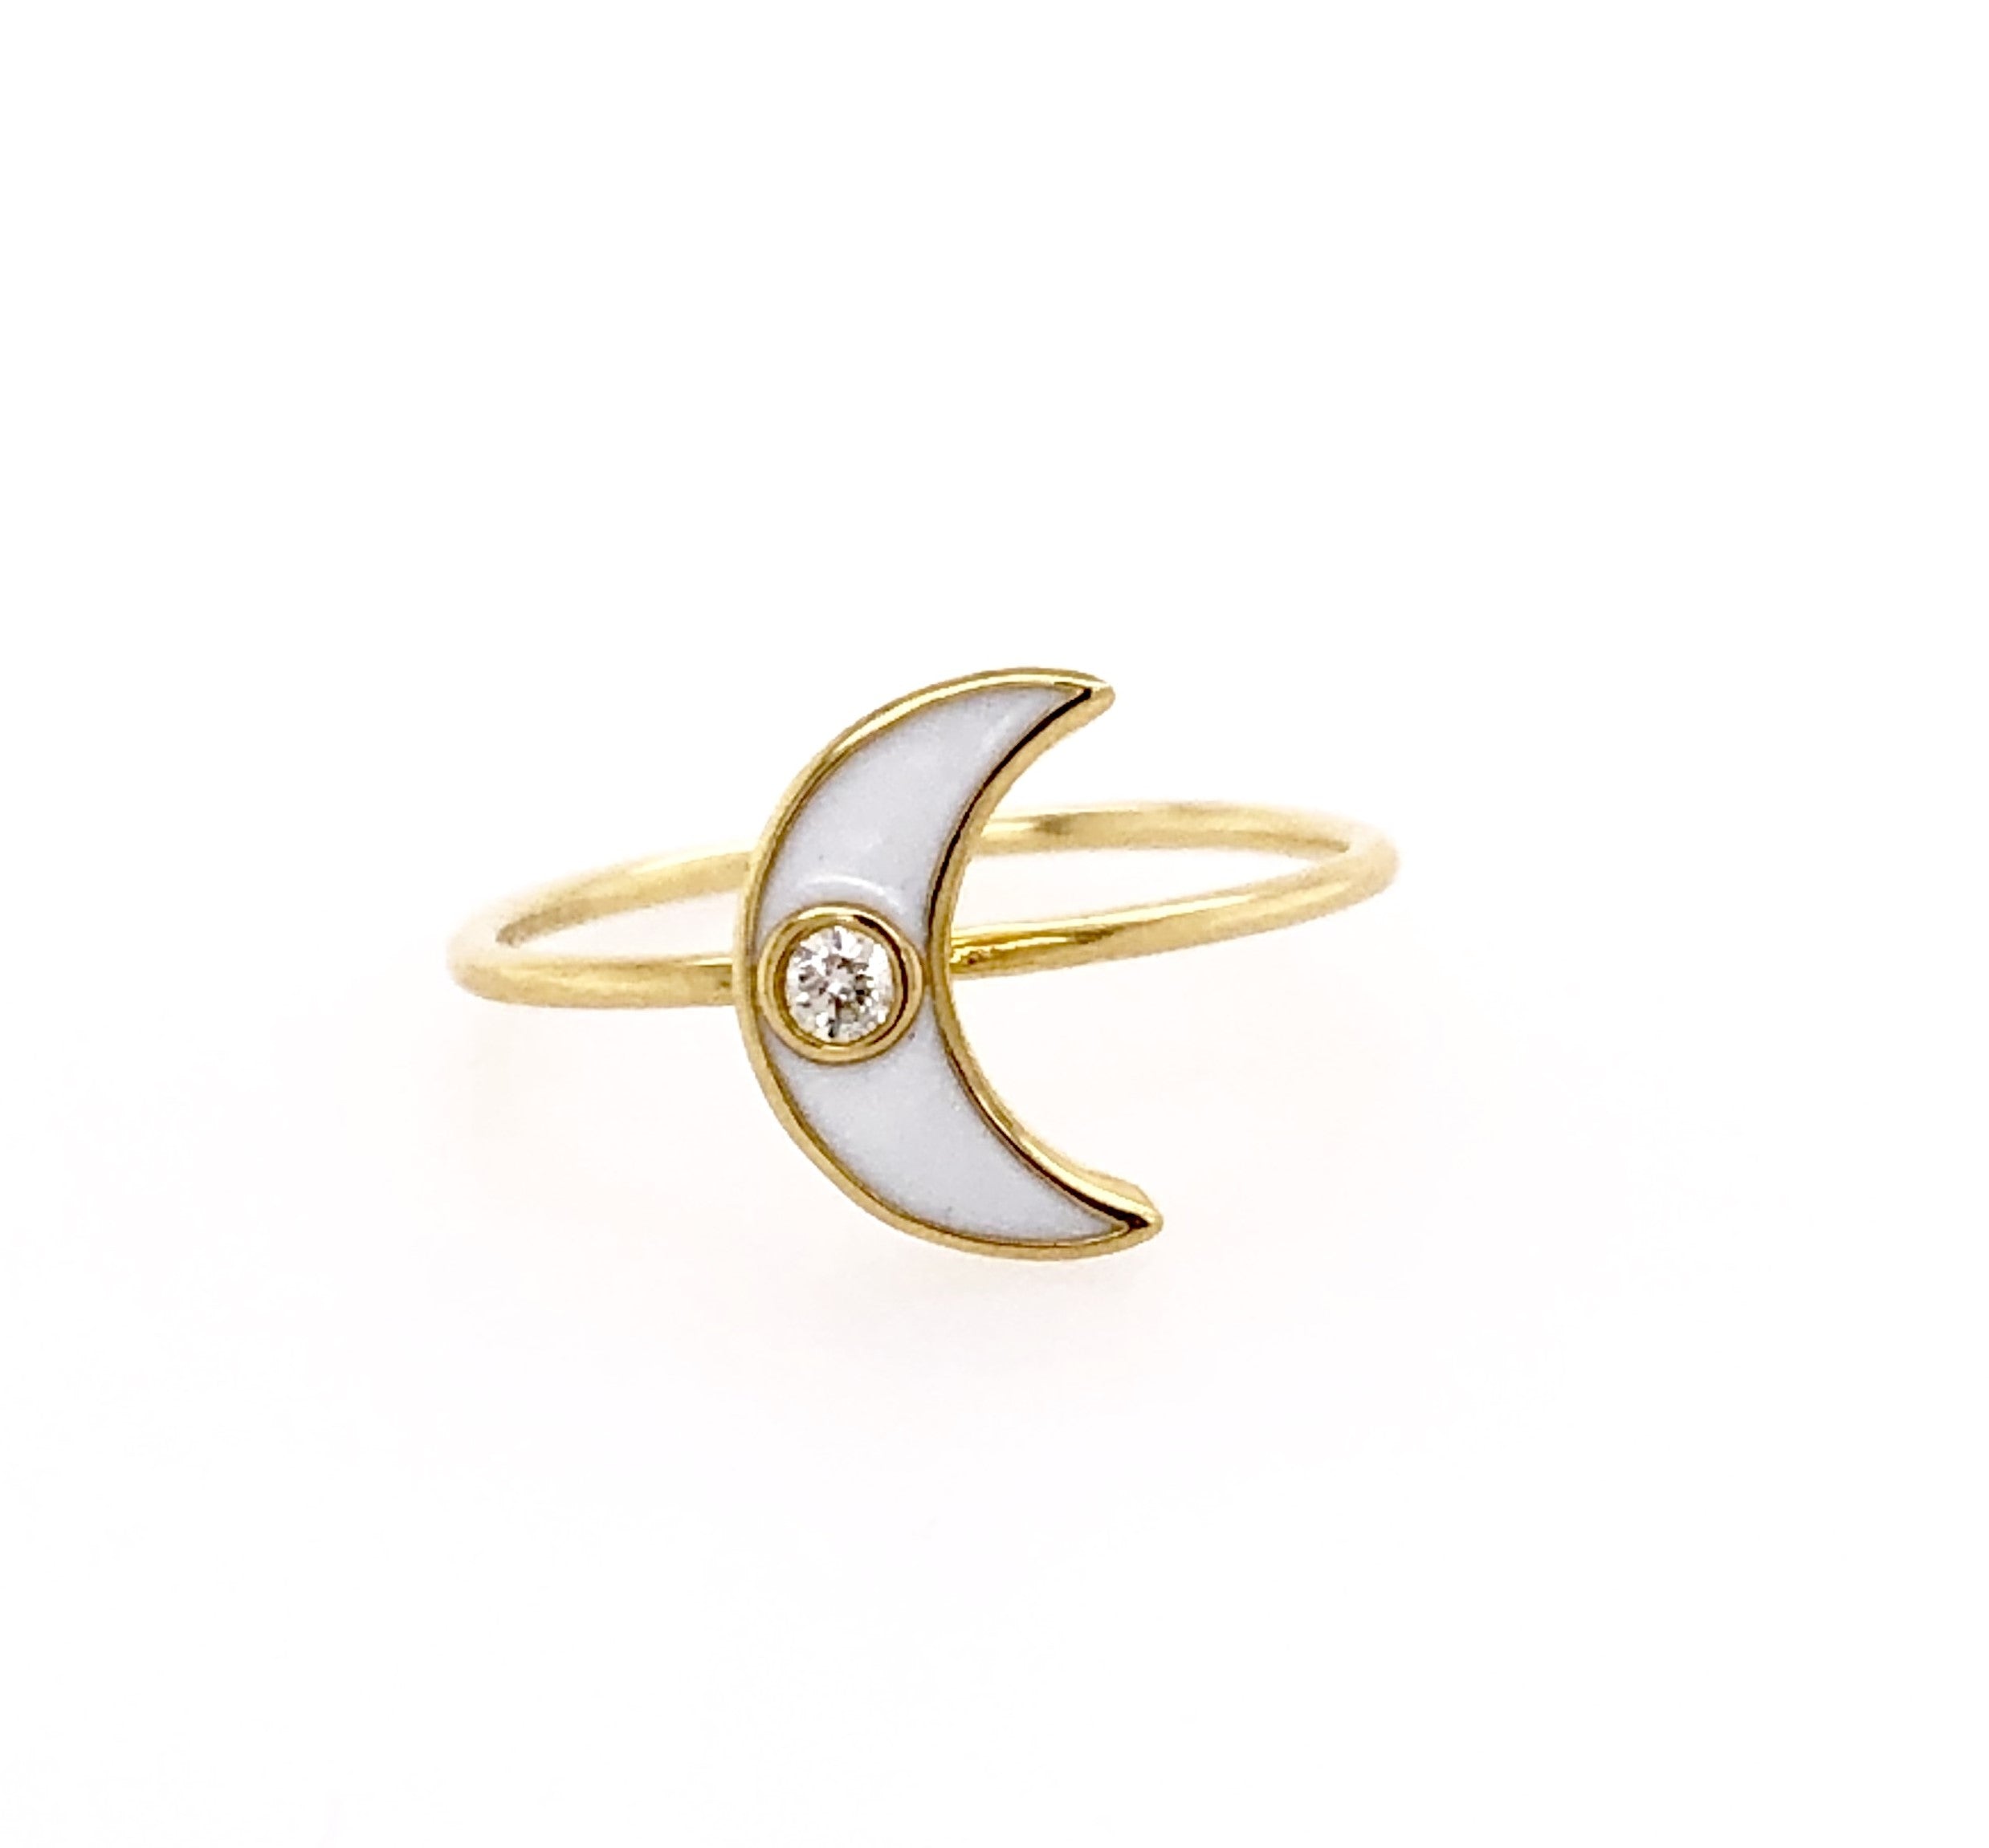 Luxurious 18K yellow gold ring, featuring a petite white diamond and a glimmering white enamel in a crescent moon shape. This dainty ring will be a perfect addition to any collection. Size 6 (resizable).